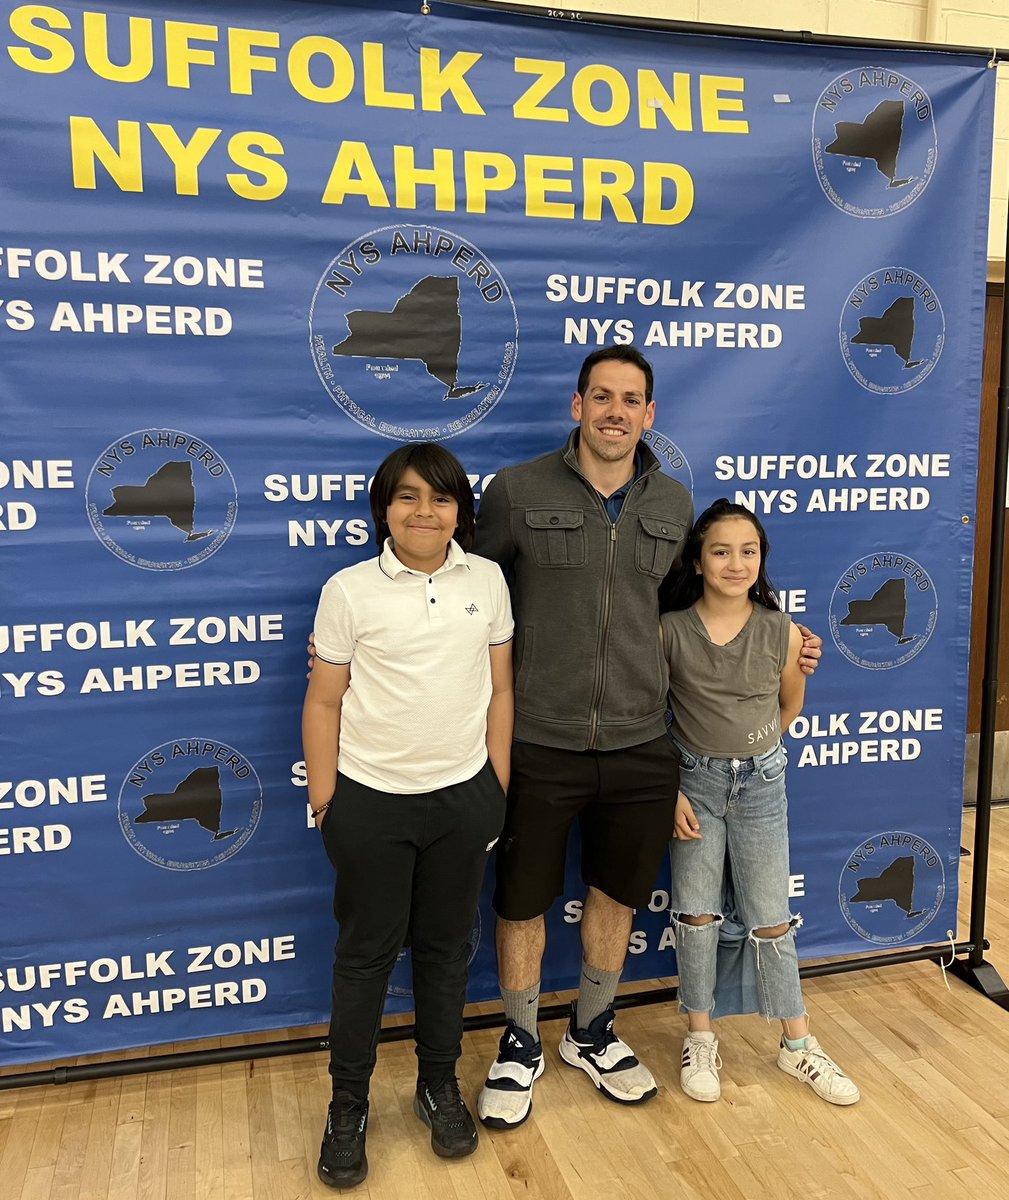 Congratulations to our amazing Hampton Bays Elementary School students Brayden and Amber who were awarded the Suffolk Zone Physical Education awards for their outstanding efforts as leaders of our Physical Education programs ‼️@HamptonBaysES @BaymenAD @hbschools